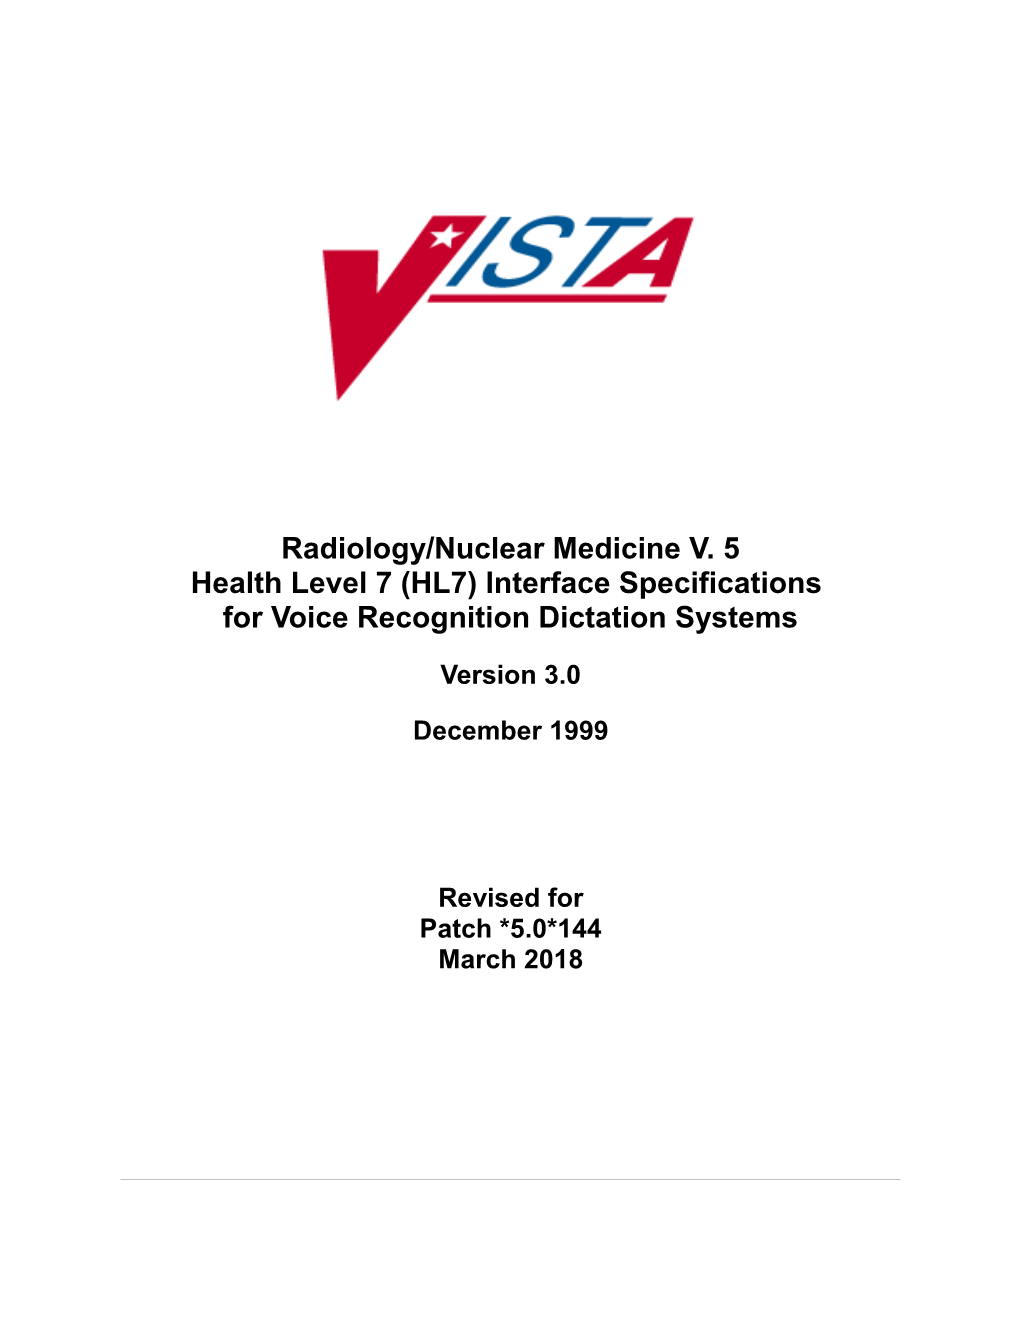 Radiology/Nuclearmedicine V. 5 Health Level 7 (HL7)Interface Specifications for Voice